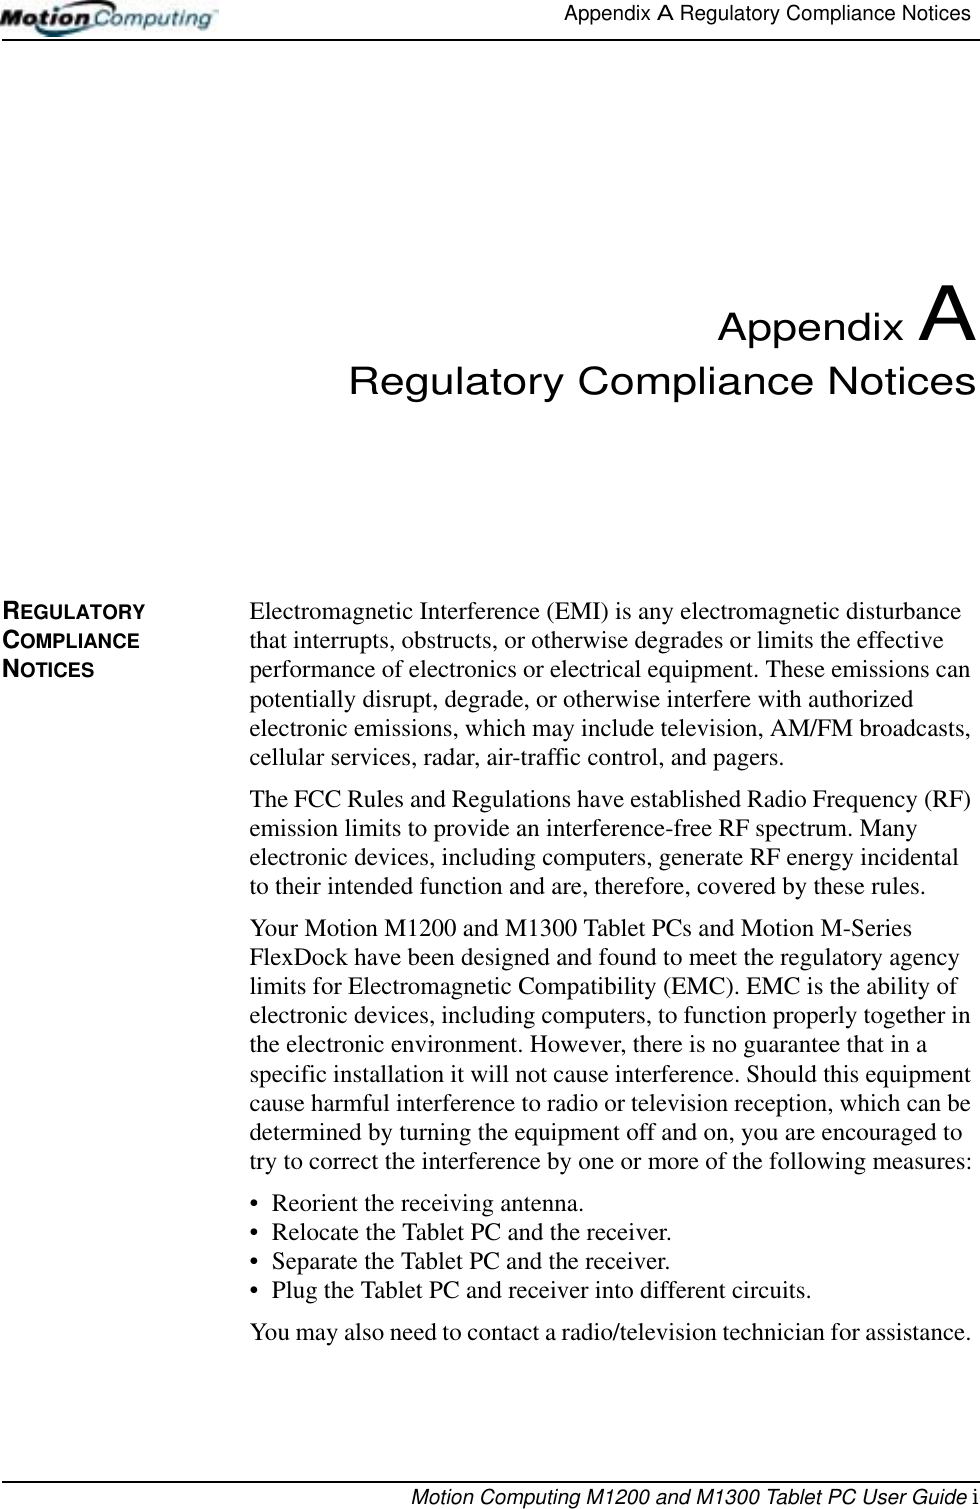 Appendix A Regulatory Compliance Notices Motion Computing M1200 and M1300 Tablet PC User Guide iAppendix ARegulatory Compliance NoticesREGULATORY COMPLIANCE NOTICESElectromagnetic Interference (EMI) is any electromagnetic disturbance that interrupts, obstructs, or otherwise degrades or limits the effective performance of electronics or electrical equipment. These emissions can potentially disrupt, degrade, or otherwise interfere with authorized electronic emissions, which may include television, AM/FM broadcasts, cellular services, radar, air-traffic control, and pagers. The FCC Rules and Regulations have established Radio Frequency (RF) emission limits to provide an interference-free RF spectrum. Many electronic devices, including computers, generate RF energy incidental to their intended function and are, therefore, covered by these rules. Your Motion M1200 and M1300 Tablet PCs and Motion M-Series FlexDock have been designed and found to meet the regulatory agency limits for Electromagnetic Compatibility (EMC). EMC is the ability of electronic devices, including computers, to function properly together in the electronic environment. However, there is no guarantee that in a specific installation it will not cause interference. Should this equipment cause harmful interference to radio or television reception, which can be determined by turning the equipment off and on, you are encouraged to try to correct the interference by one or more of the following measures:• Reorient the receiving antenna.• Relocate the Tablet PC and the receiver.• Separate the Tablet PC and the receiver.• Plug the Tablet PC and receiver into different circuits.You may also need to contact a radio/television technician for assistance. 